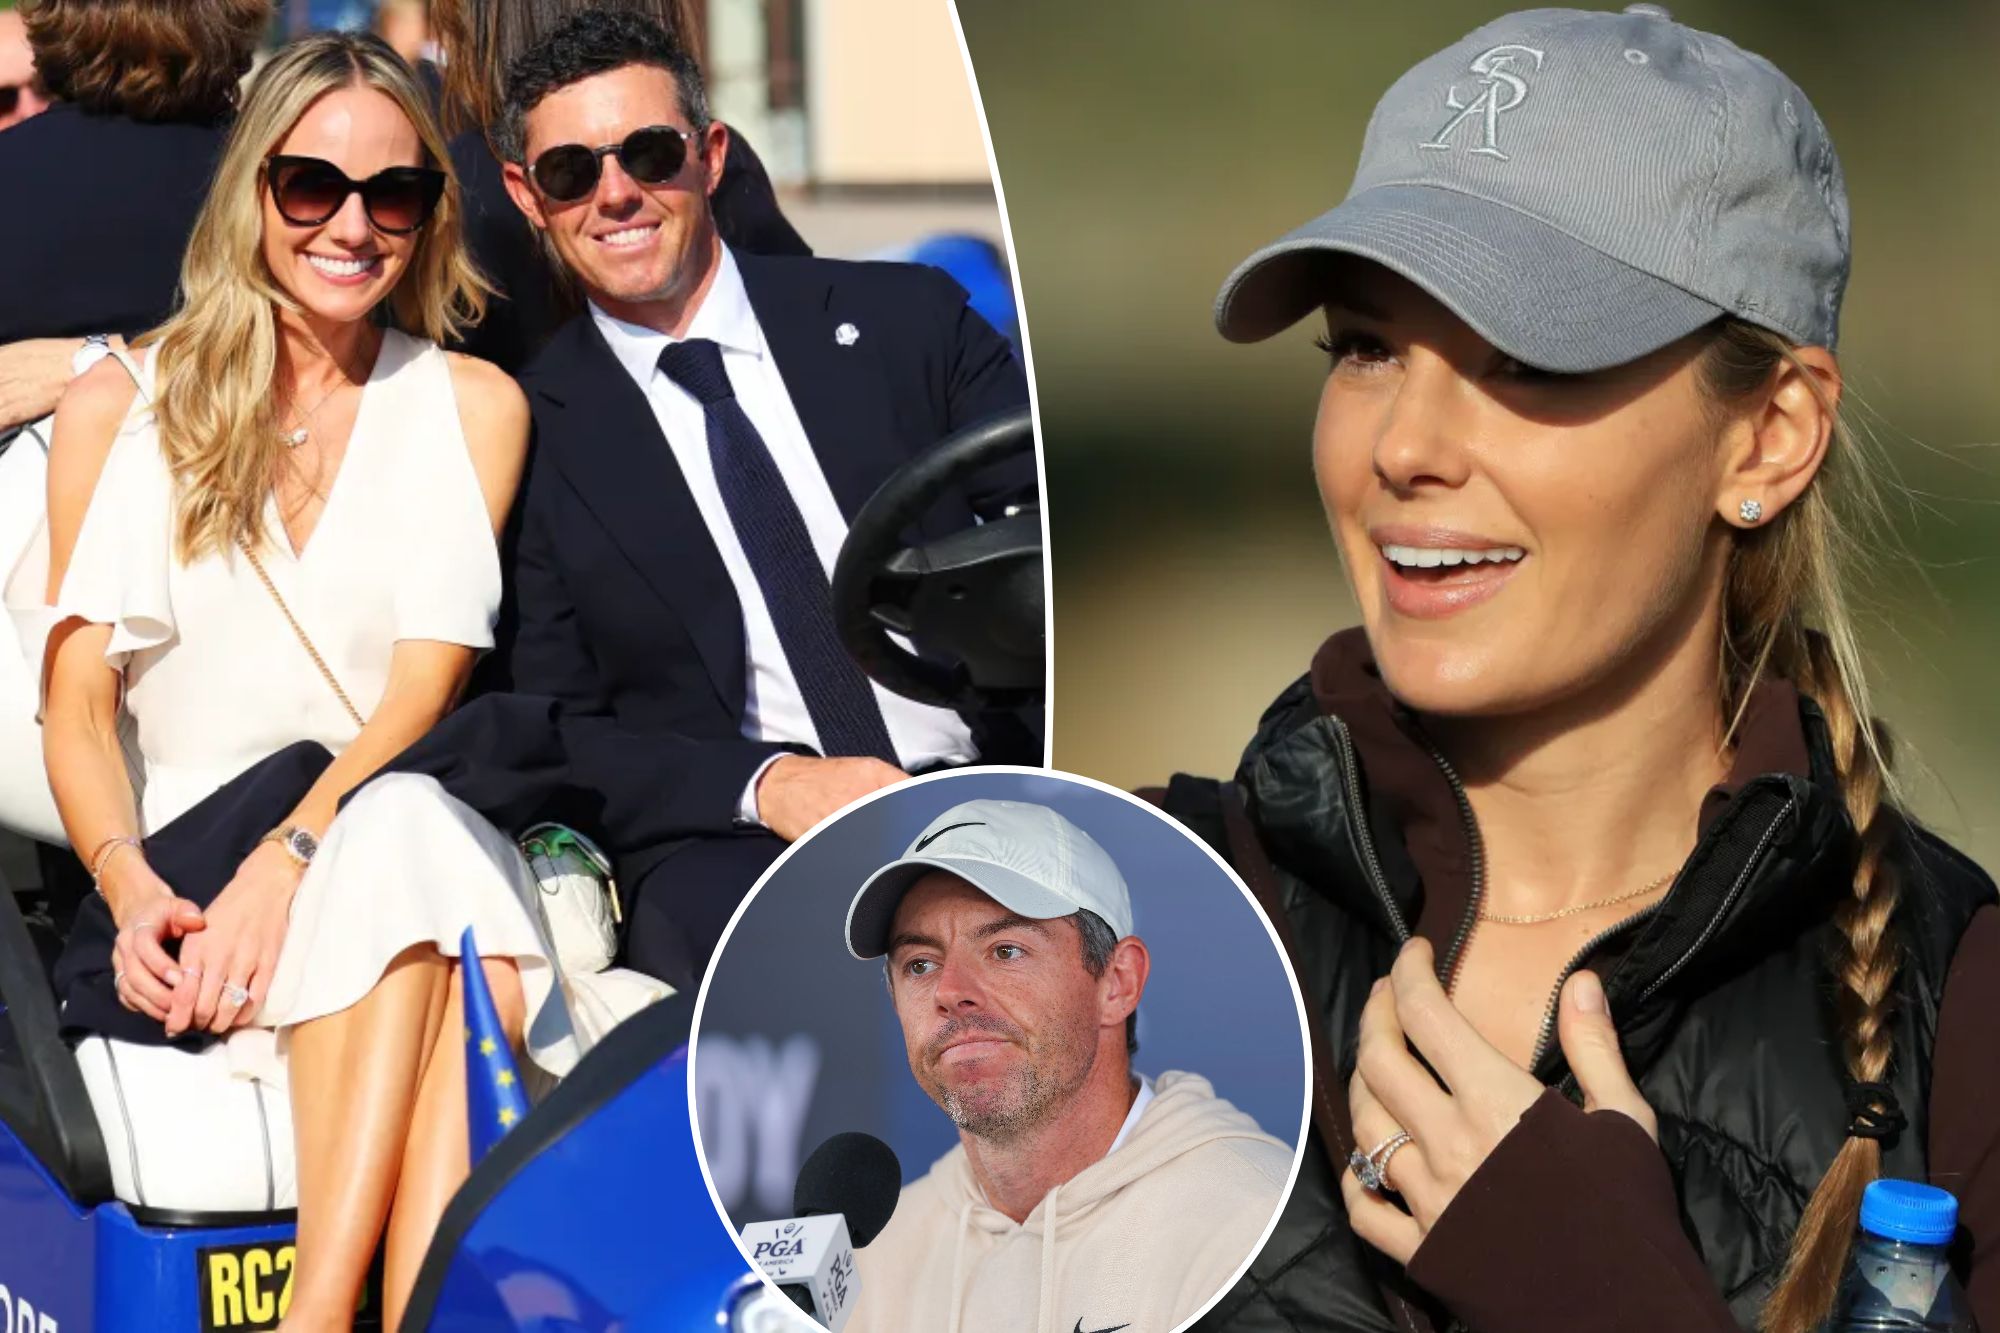 Rory McIlroy's estrange wife Erica Stoll seen after divorce reveal